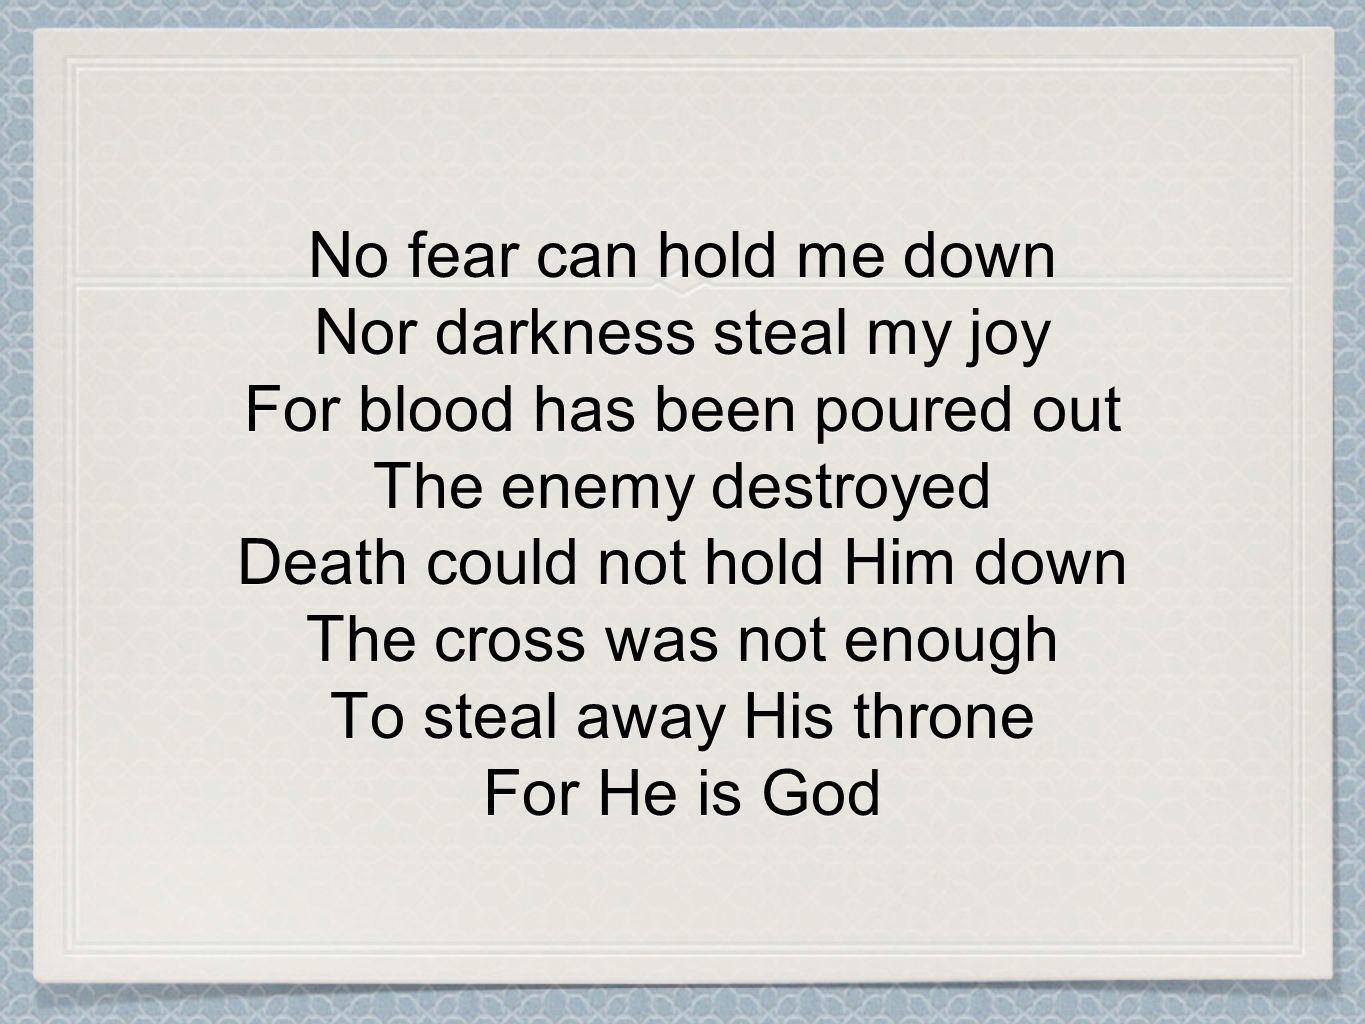 No fear can hold me down Nor darkness steal my joy For blood has been poured out The enemy destroyed Death could not hold Him down The cross was not enough To steal away His throne For He is God